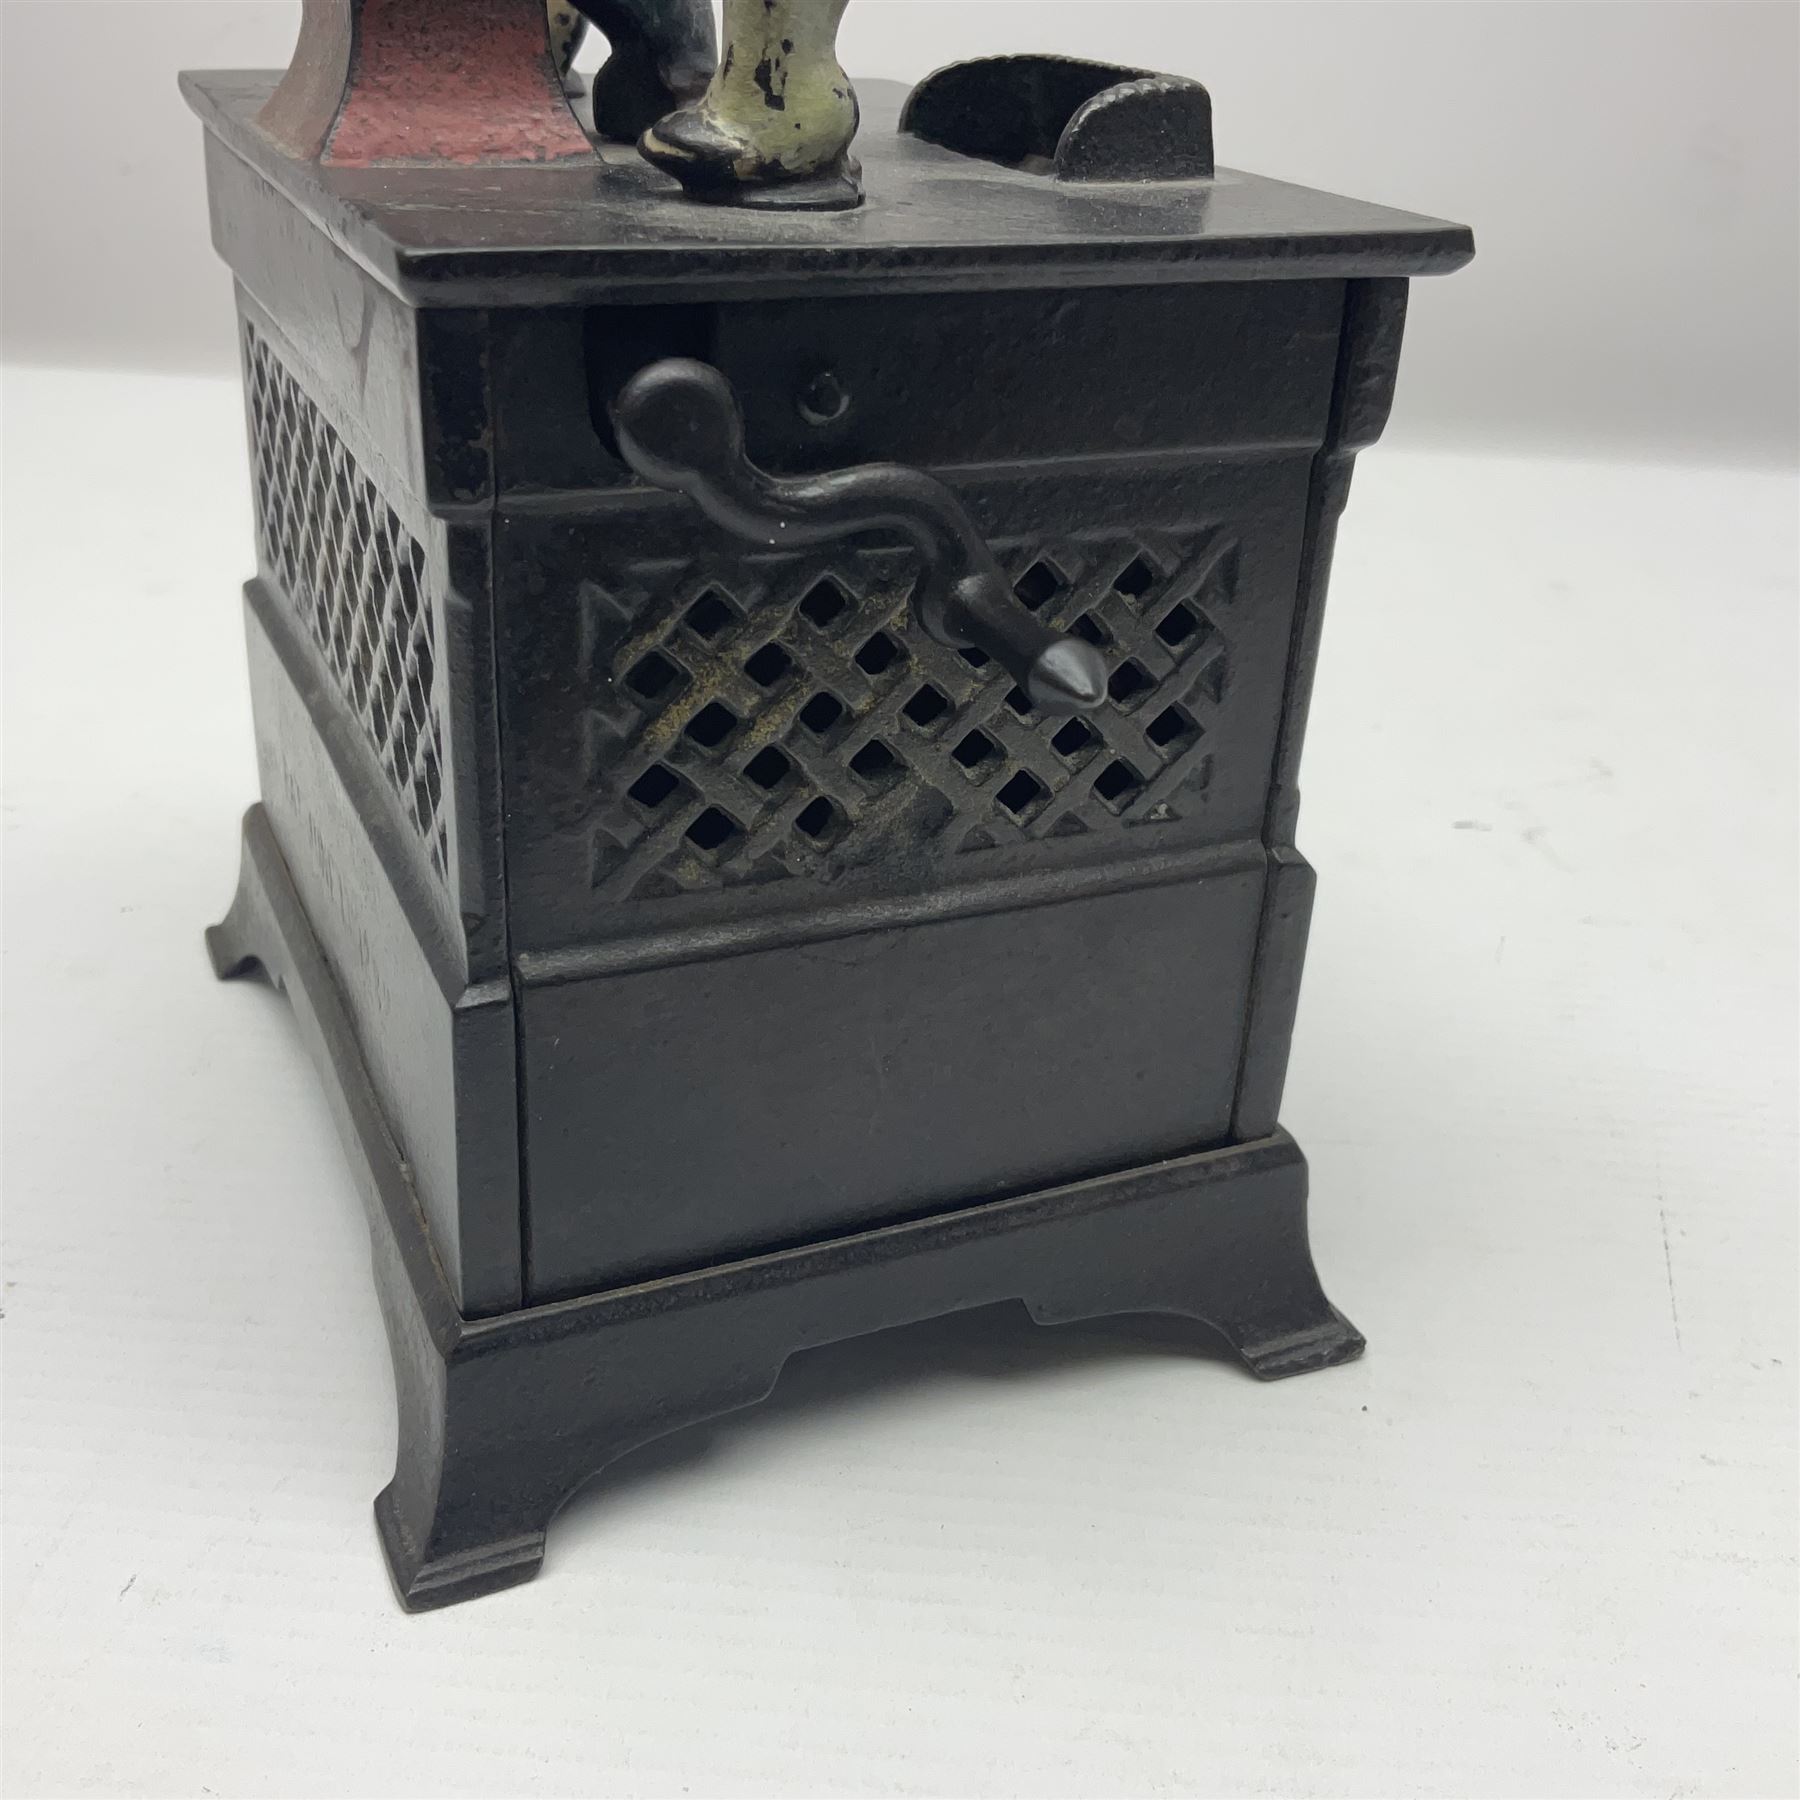 American 'Organ Bank' musical cast-iron mechanical money bank with hand cranked action and seated fi - Image 7 of 10